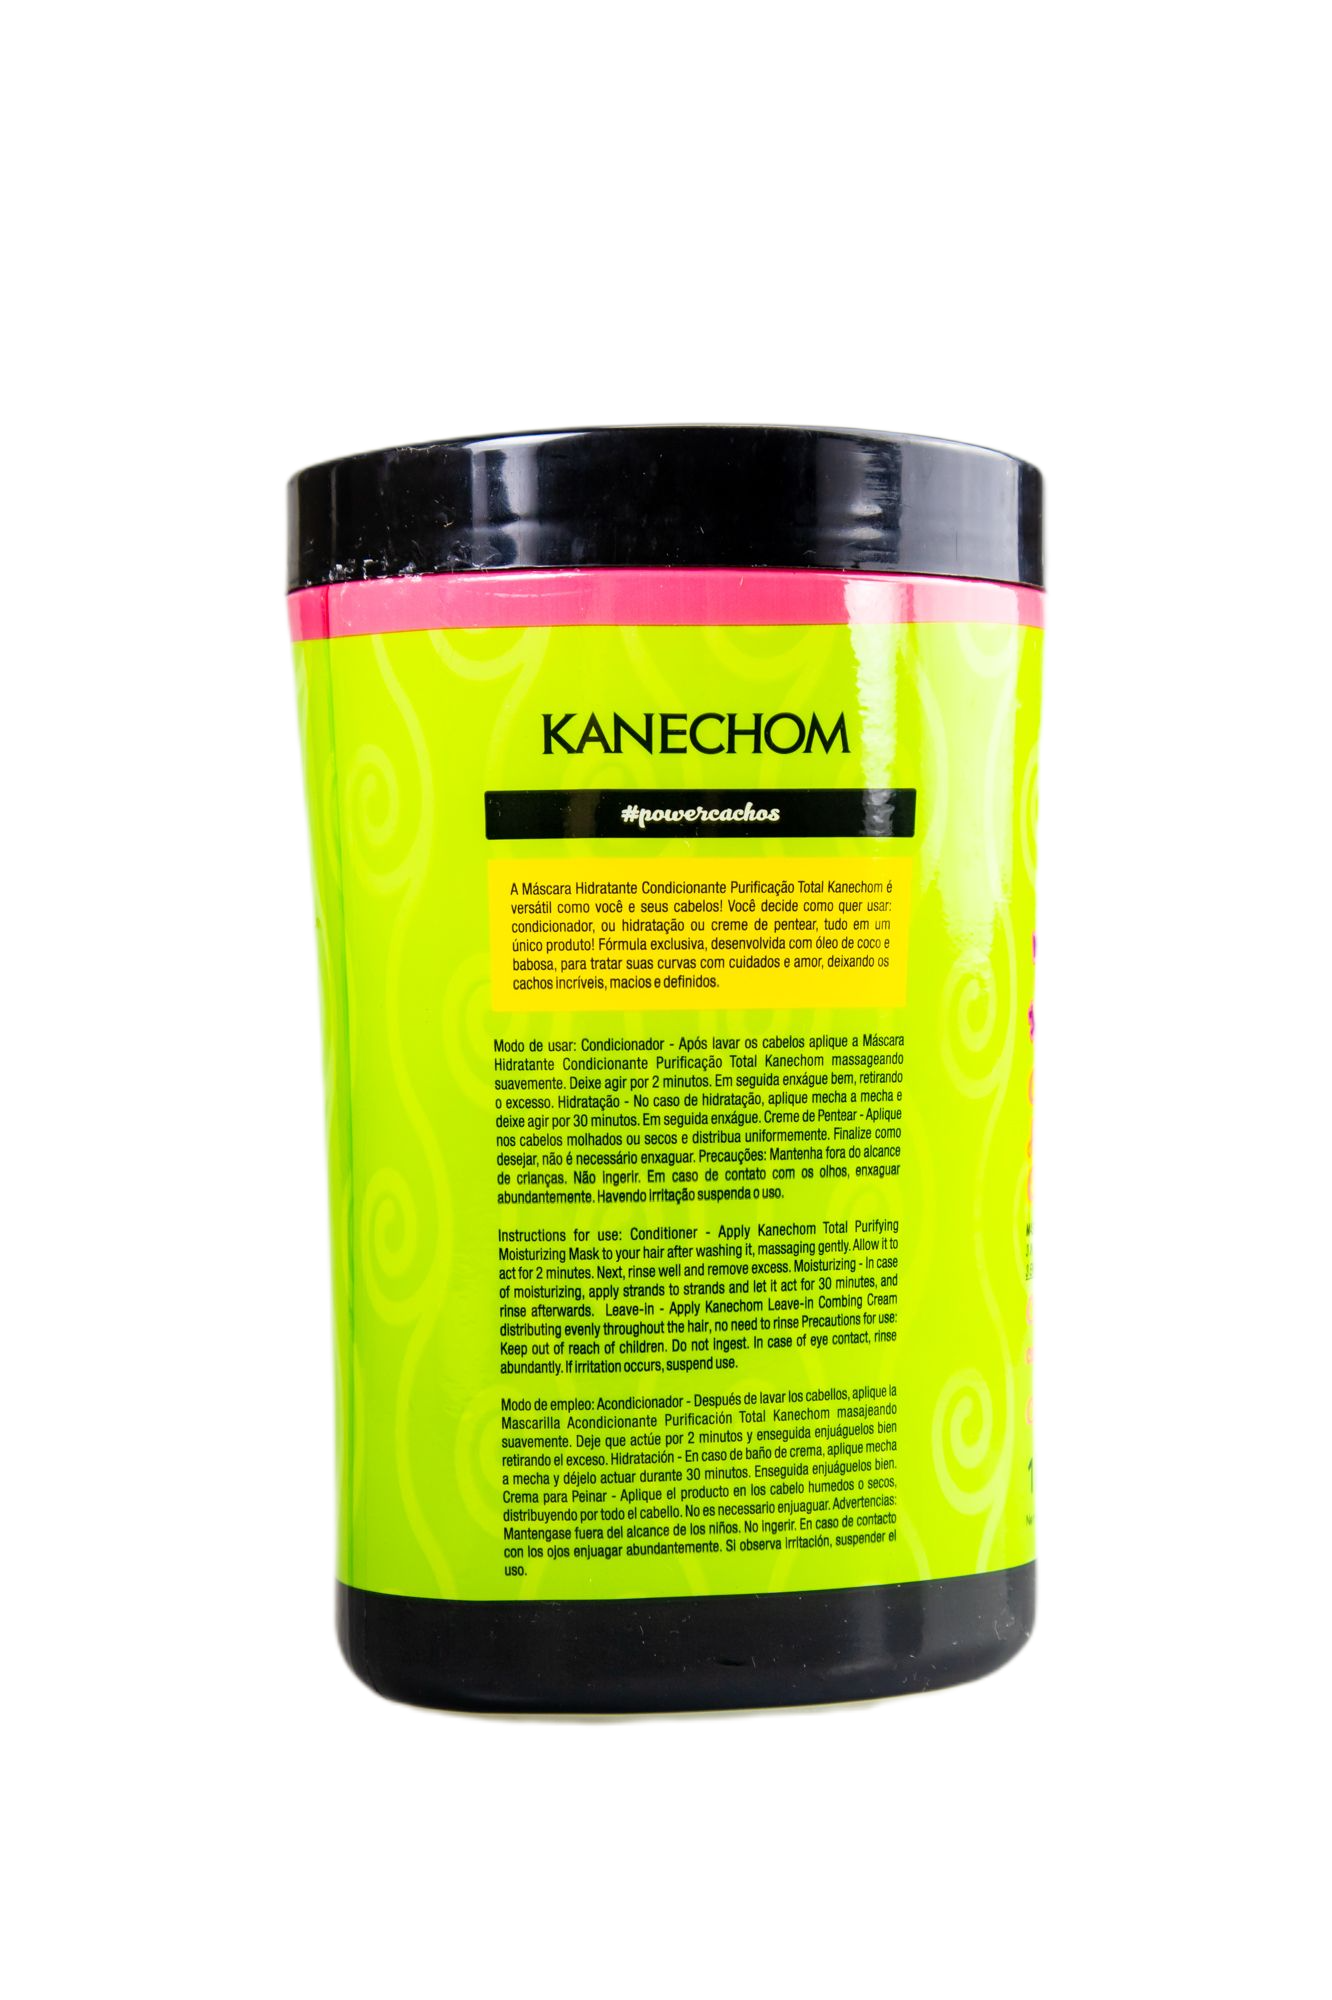 Kanechom Hair Mask Vegan Power Cachos 3 in 1 Conditioner Combing Curly Hydration 1Kg - Kanechom